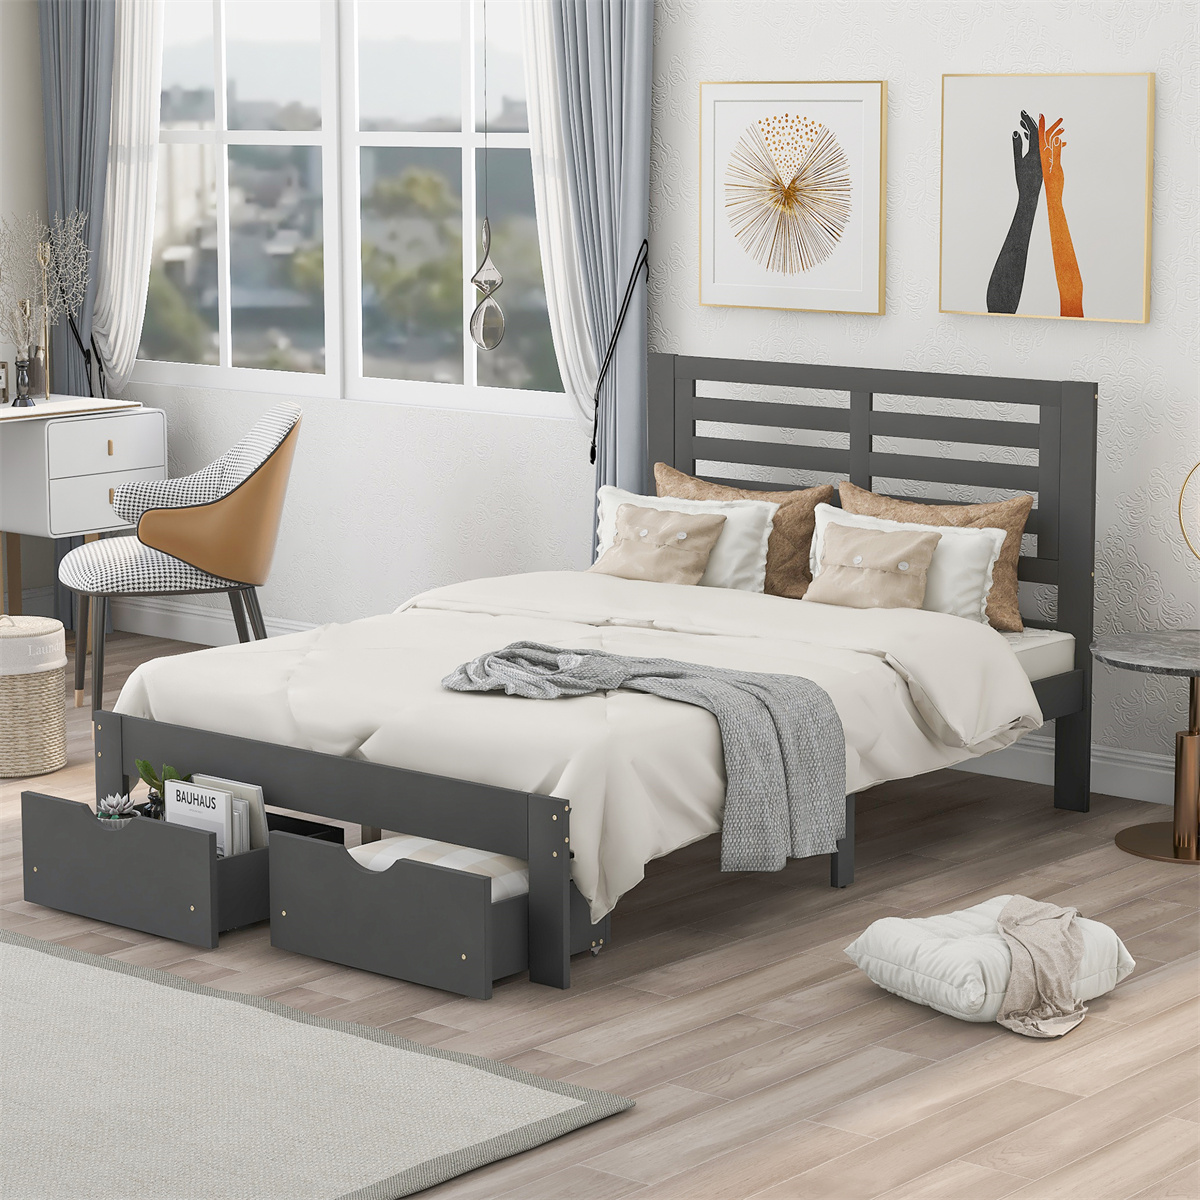 Full Size Platform Bed with Storage Drawers and Headboard, Wood Platform Bed Frame with Wooden Slat Support for Bedroom, Gray